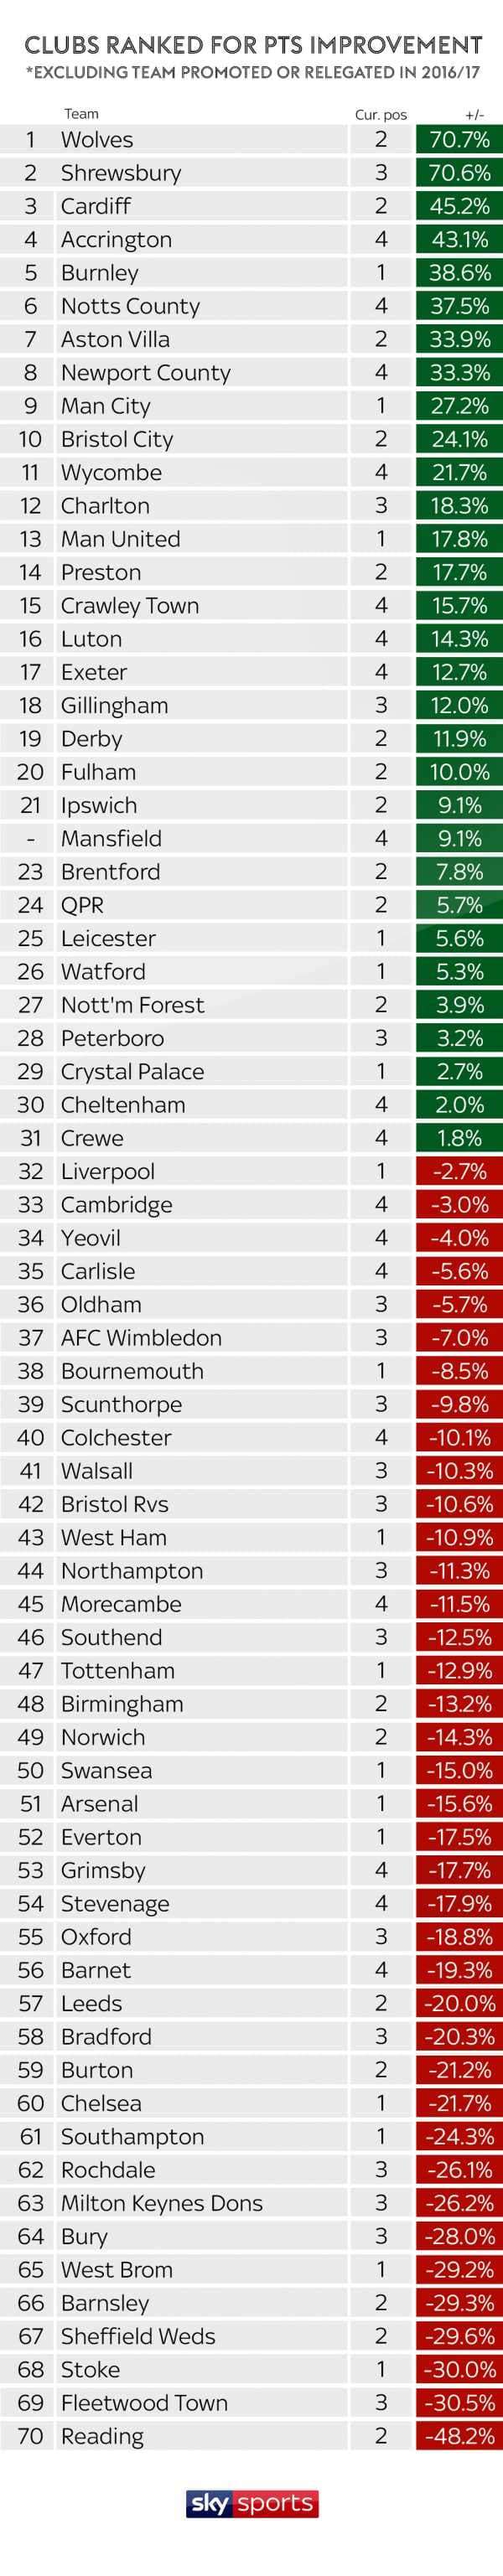 Premier League, Championship, League One and Two clubs ranked for improvement